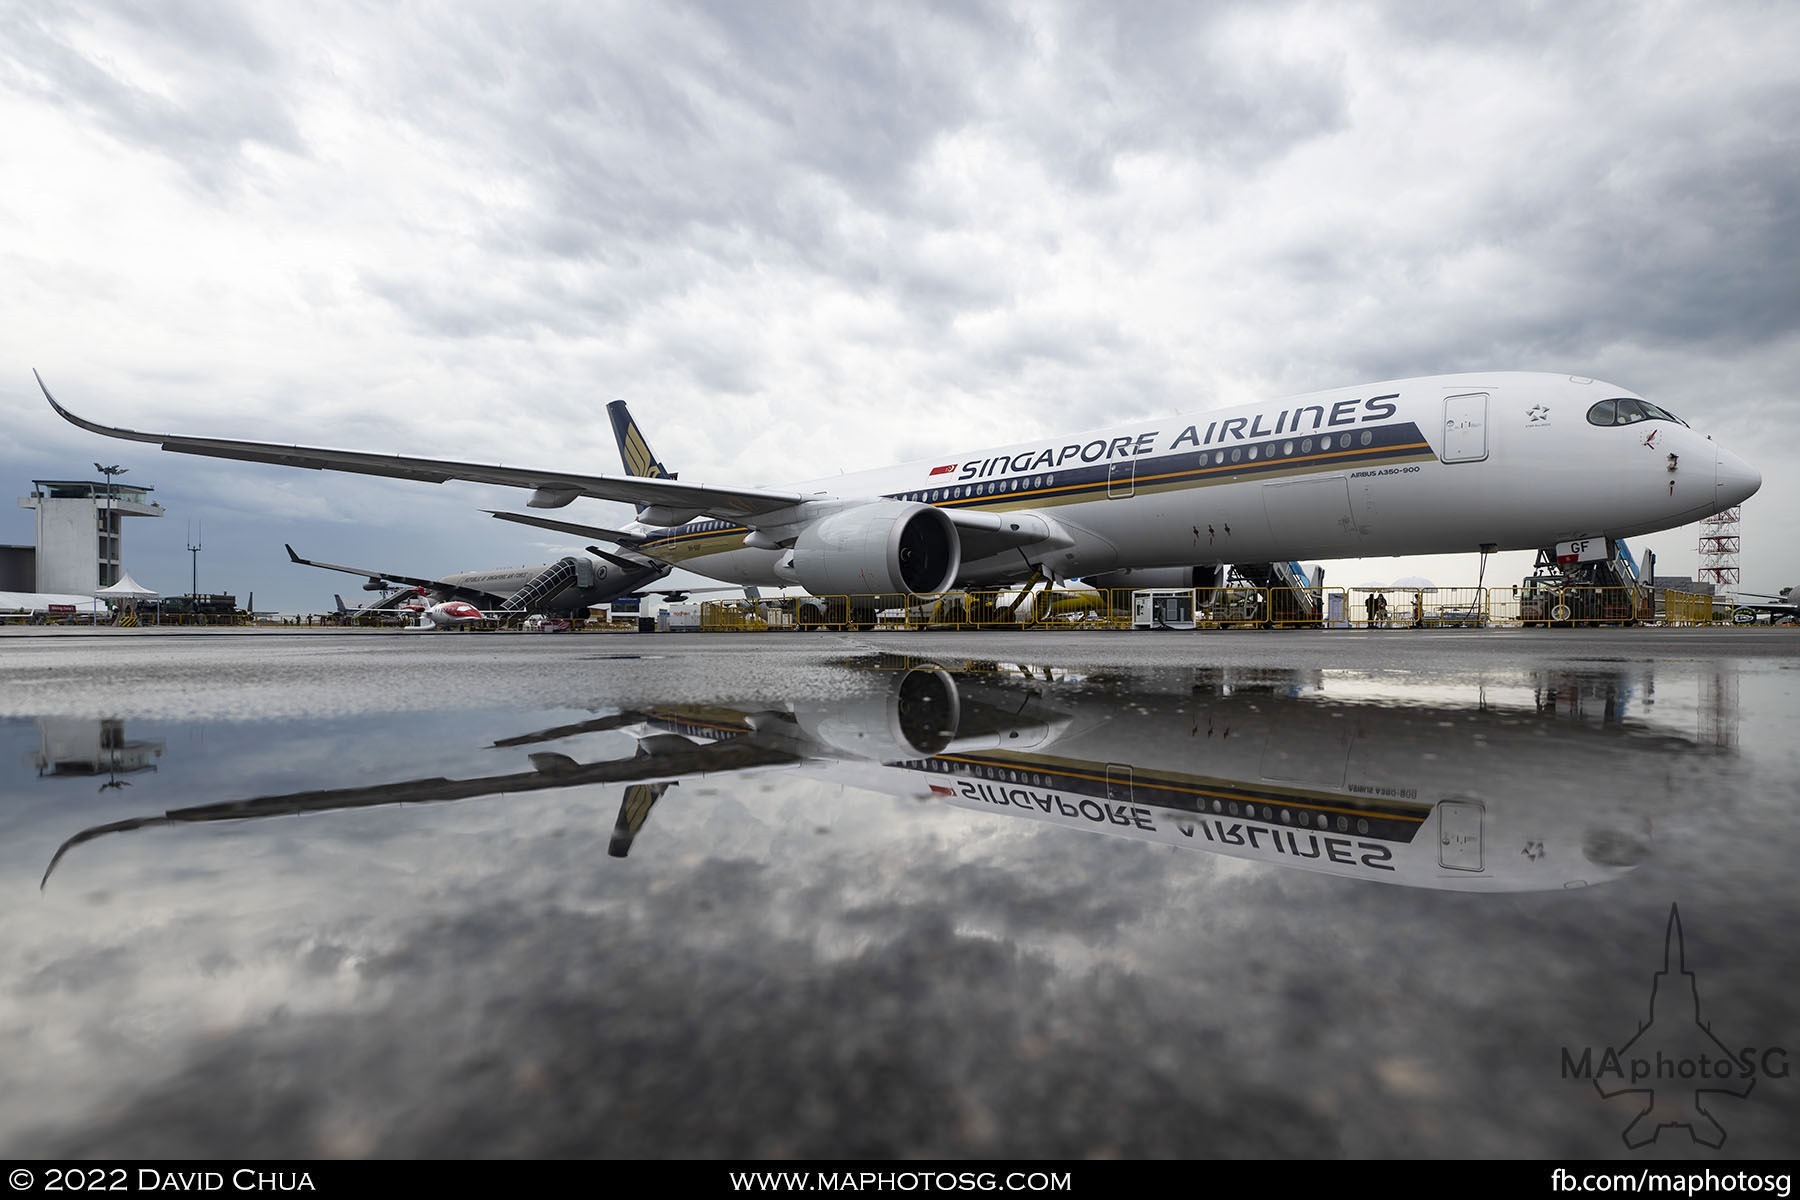 Singapore Airlines Airbus A350-900 ULR after a heavy downpour on day 2 of the show